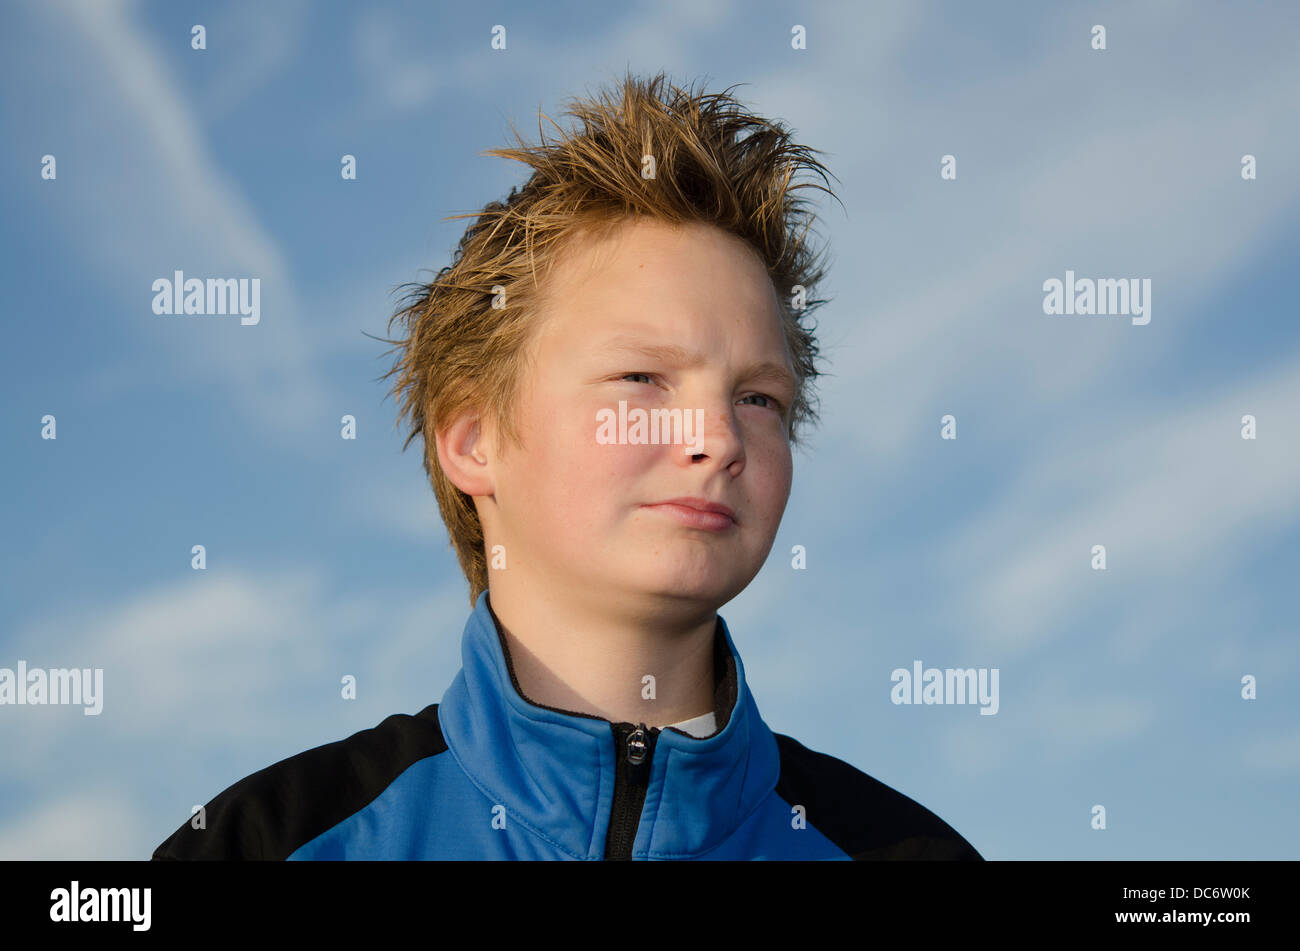 Portrait of teenager with spiky hair against blue sky Stock Photo